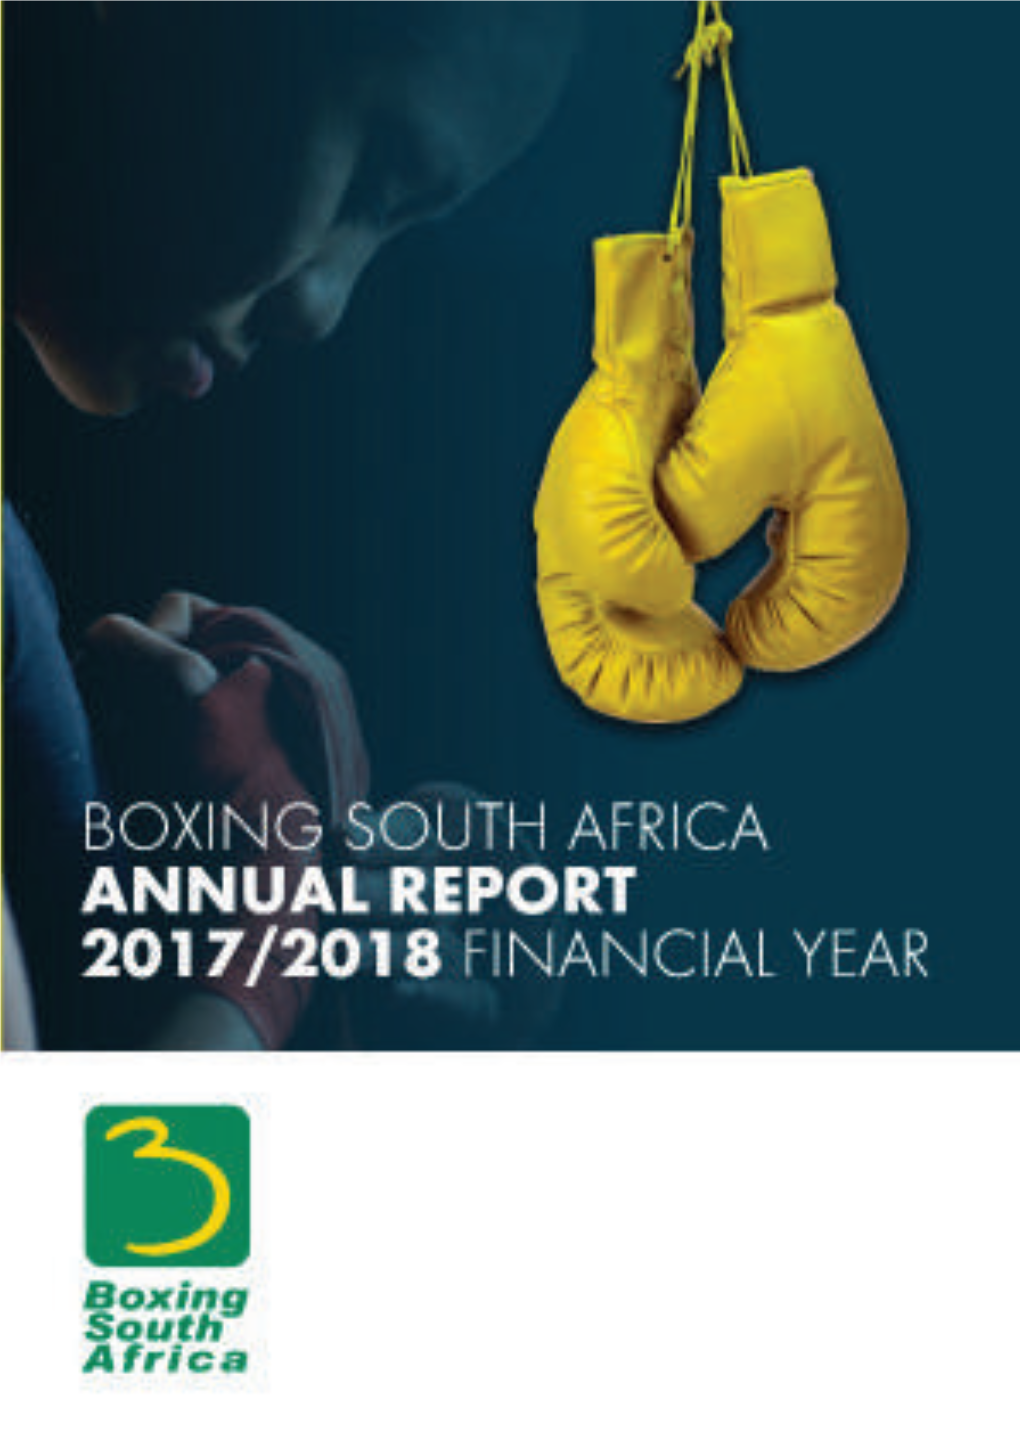 Annual Report 2017/2018 Financial Year